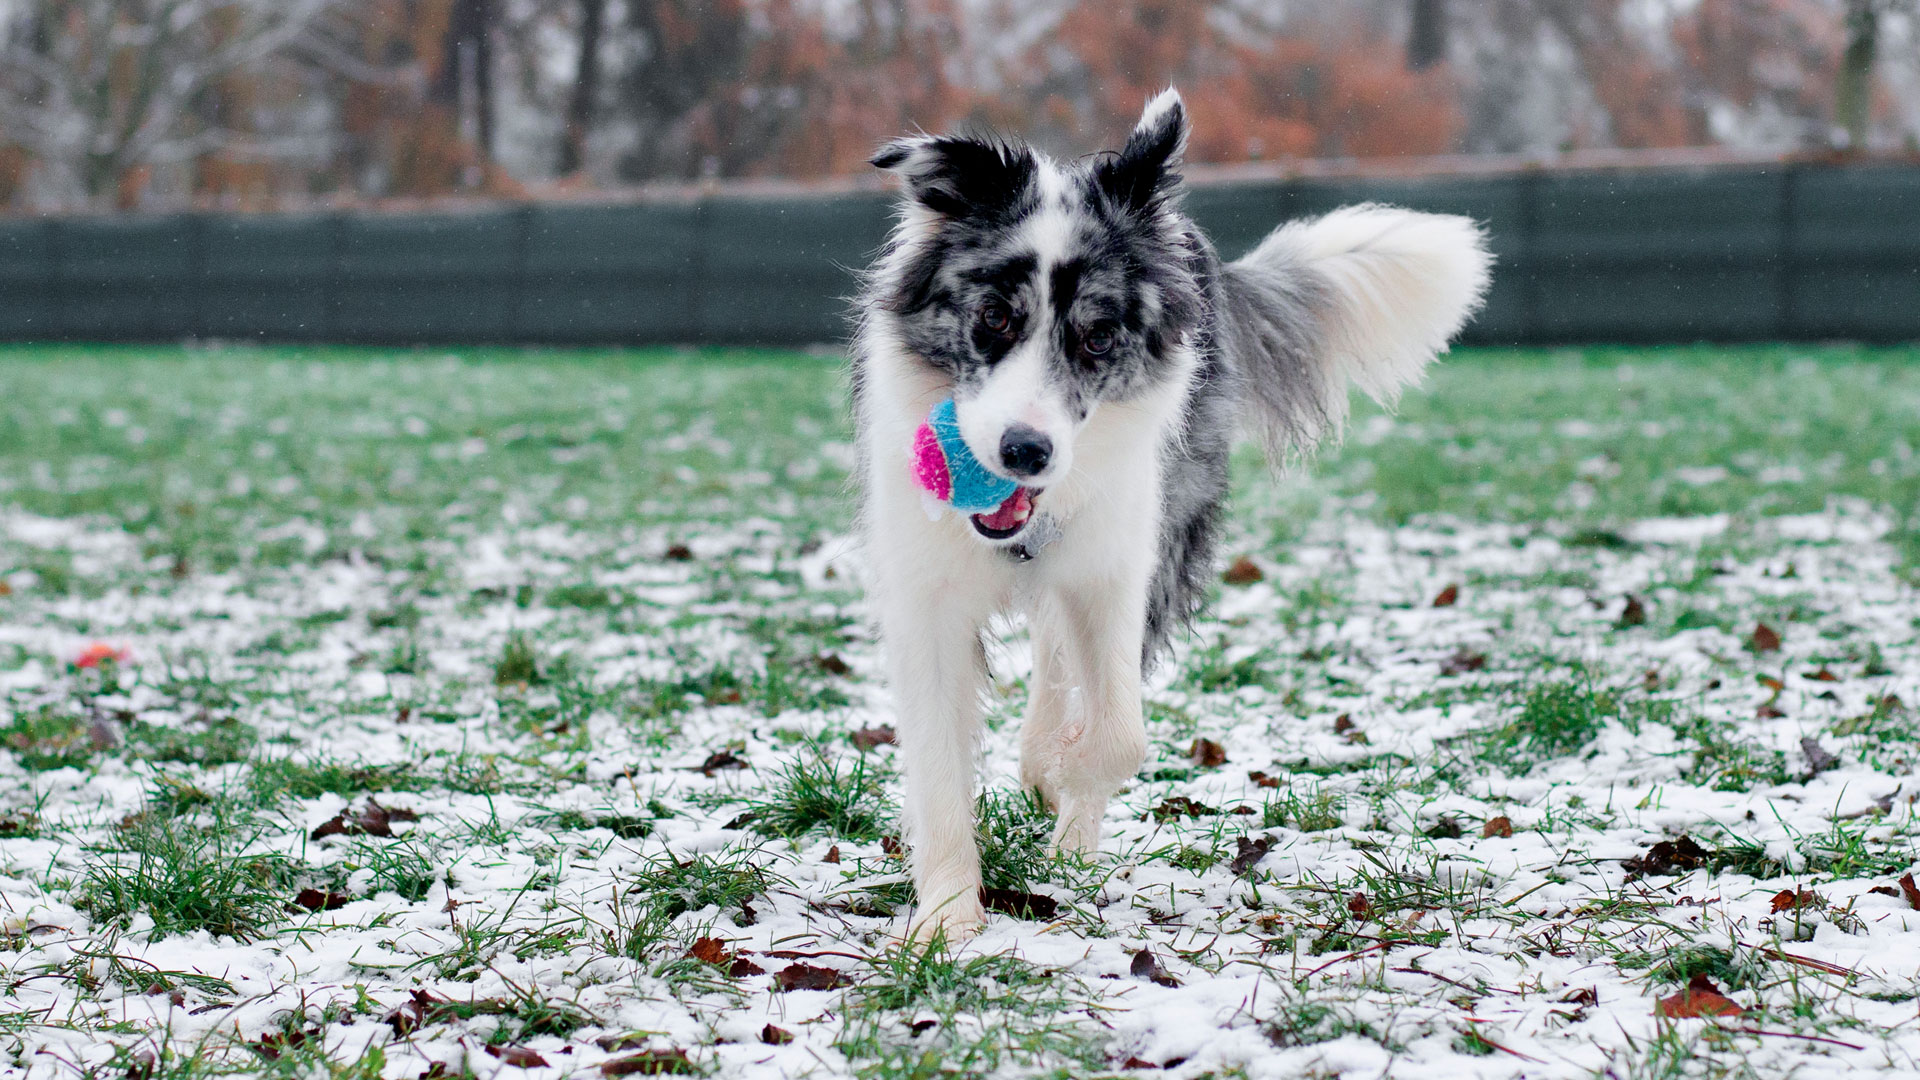 Does your dog refuse to bring the ball back when you play fetch? Here's one trainer's genius solution